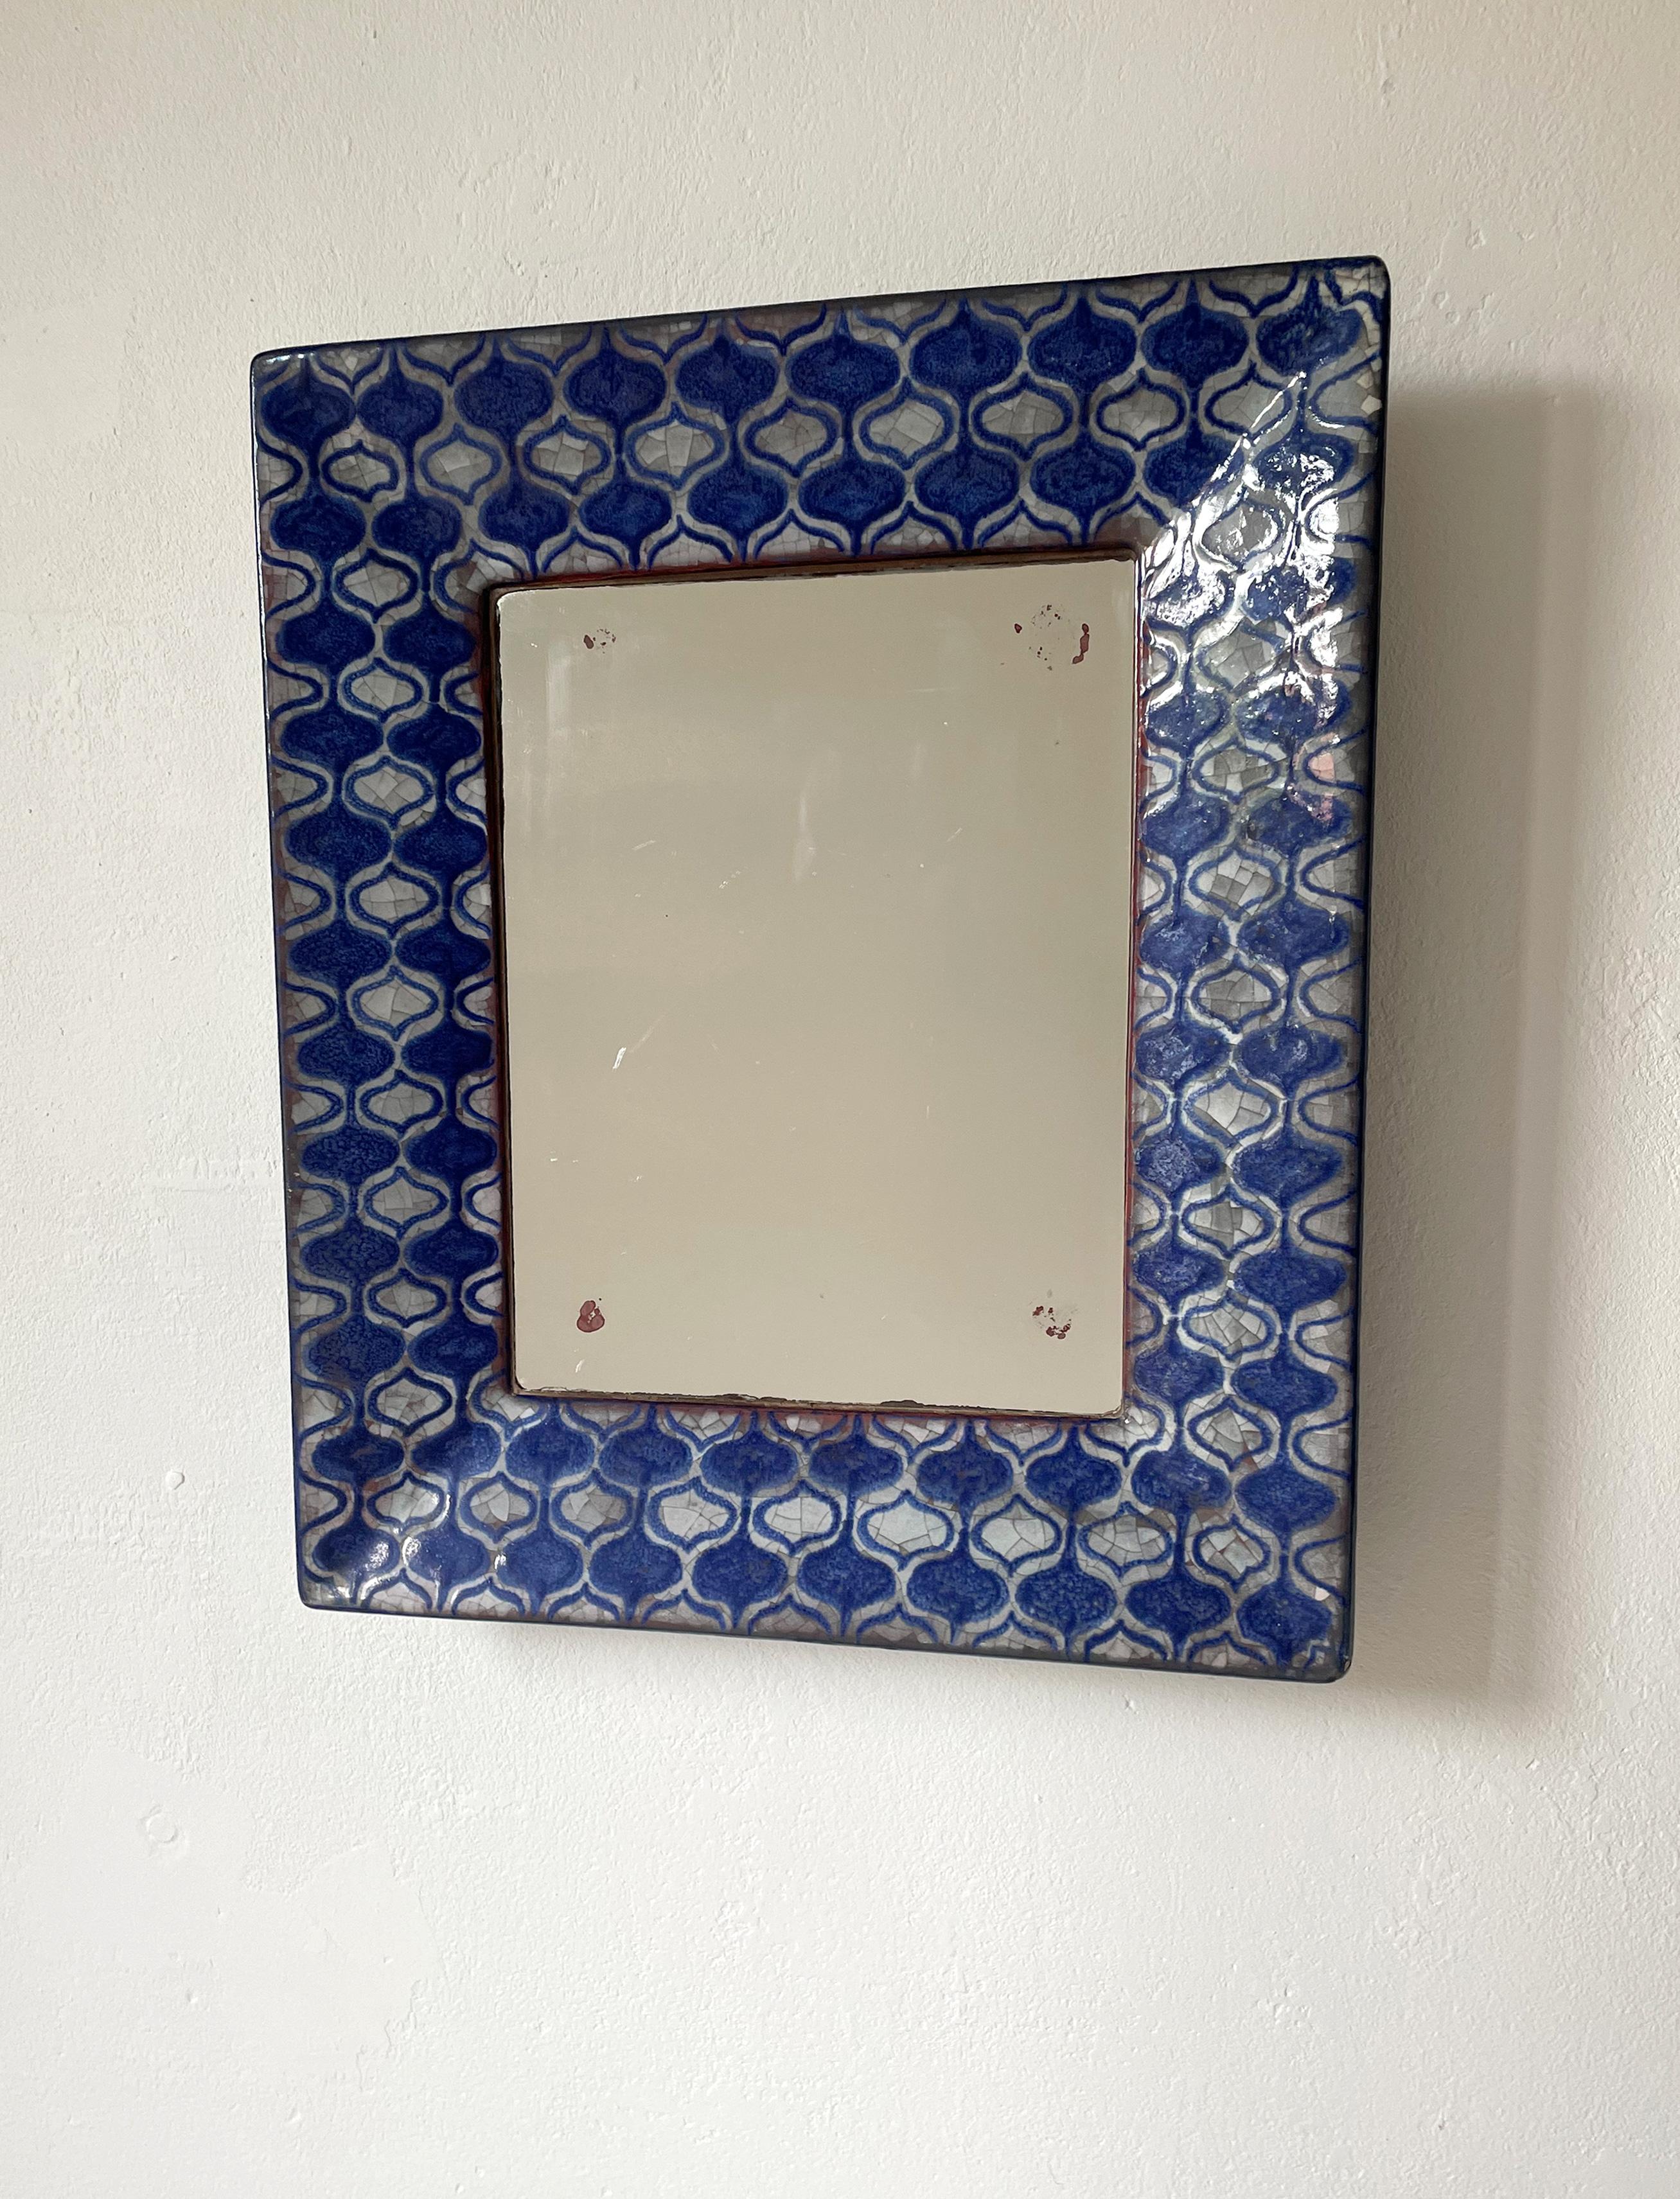 Pottery Vintage Persia Glazed Ceramic Wall Mirror, Michael Andersen, 1960s For Sale